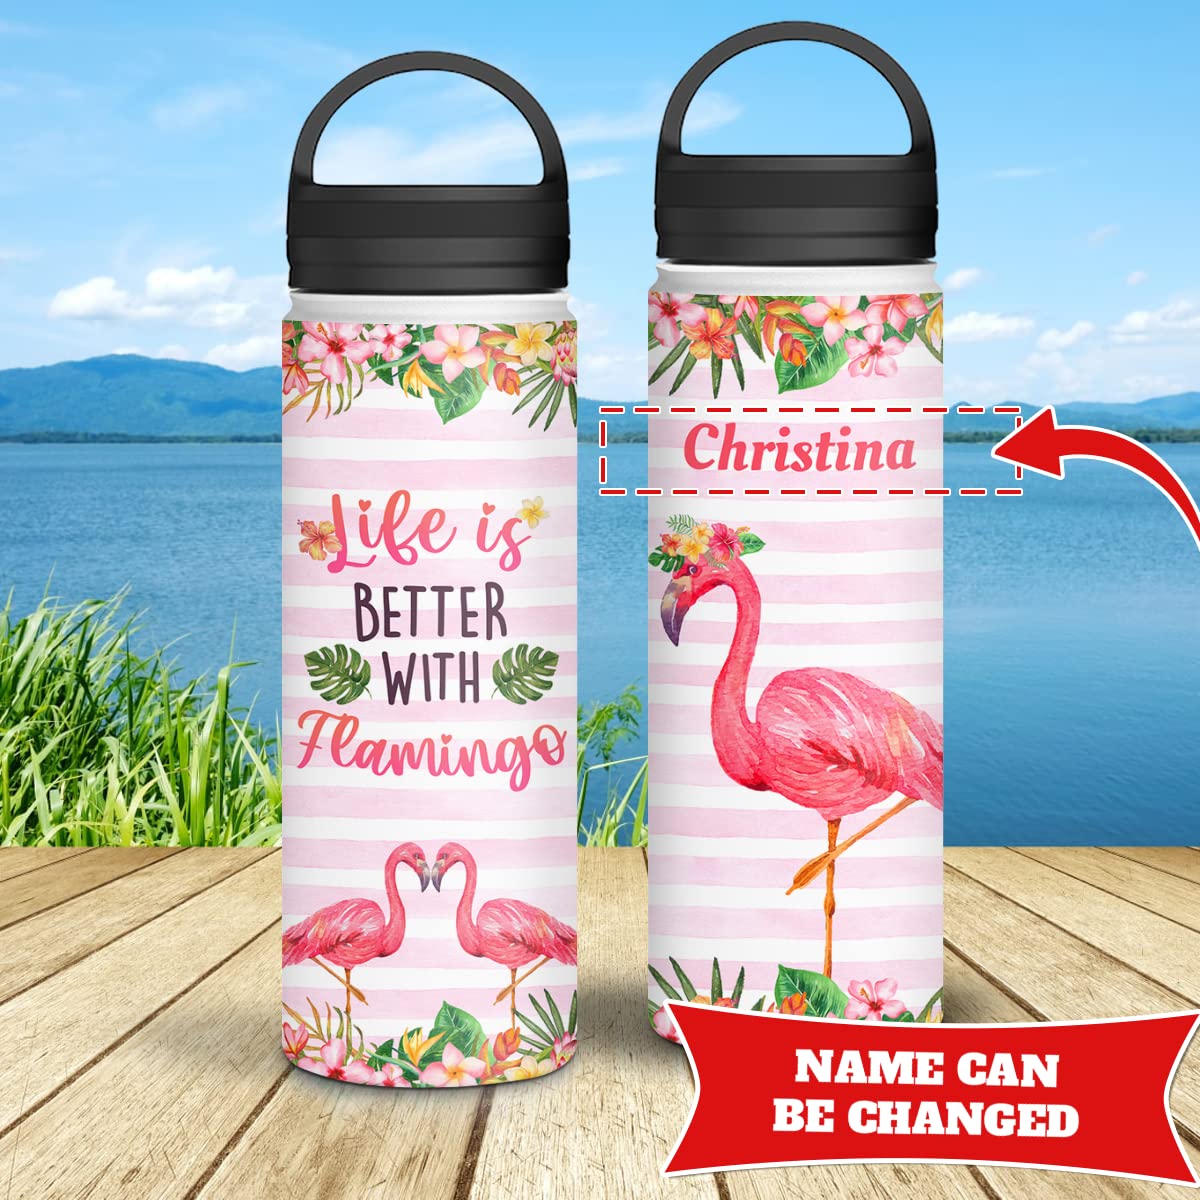 winorax Personalized Famingo Water Bottle Life Is Better With Flamingo Bottles Reminder For Women Girls Teen 12oz 18oz 32oz Stainless Steel Inspirational Gifts For Birthday Back To School Christmas